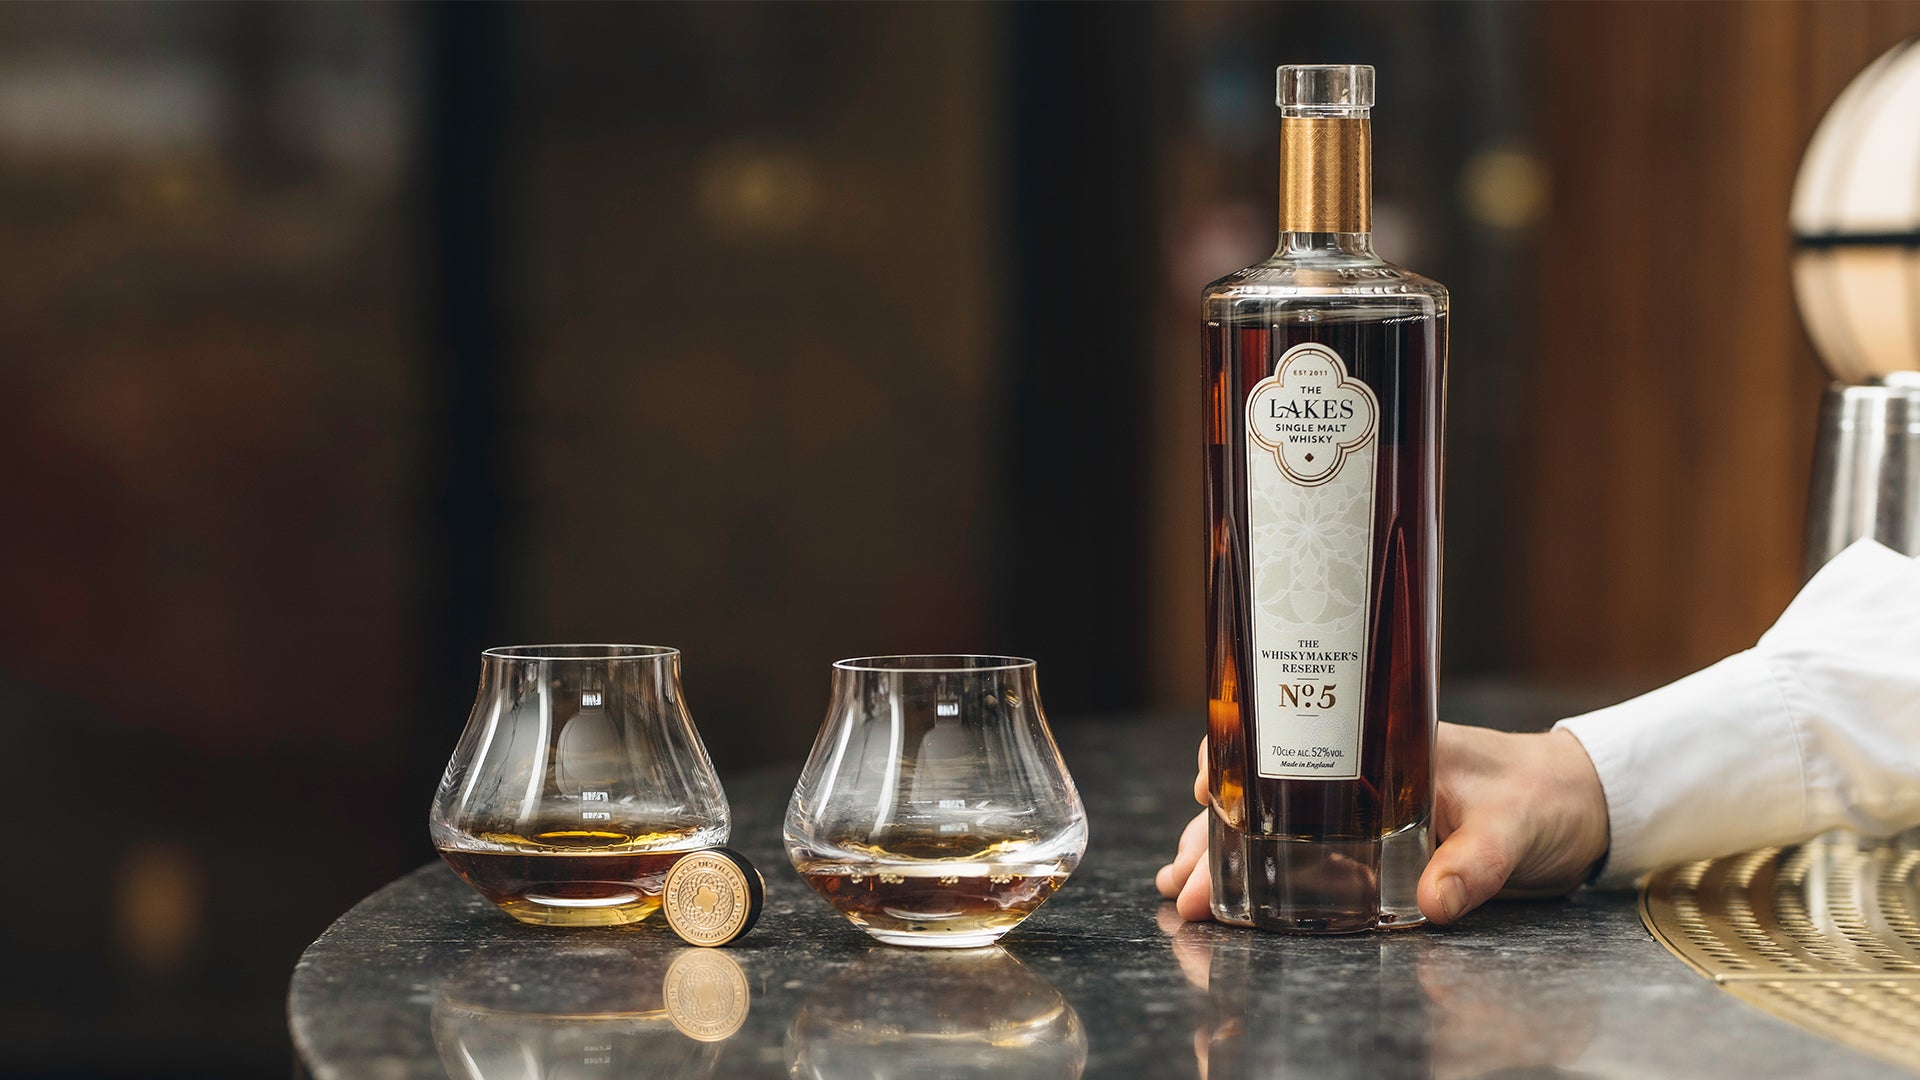 Introducing The Whiskymaker's Reserve No.5 | The Journal – The ...